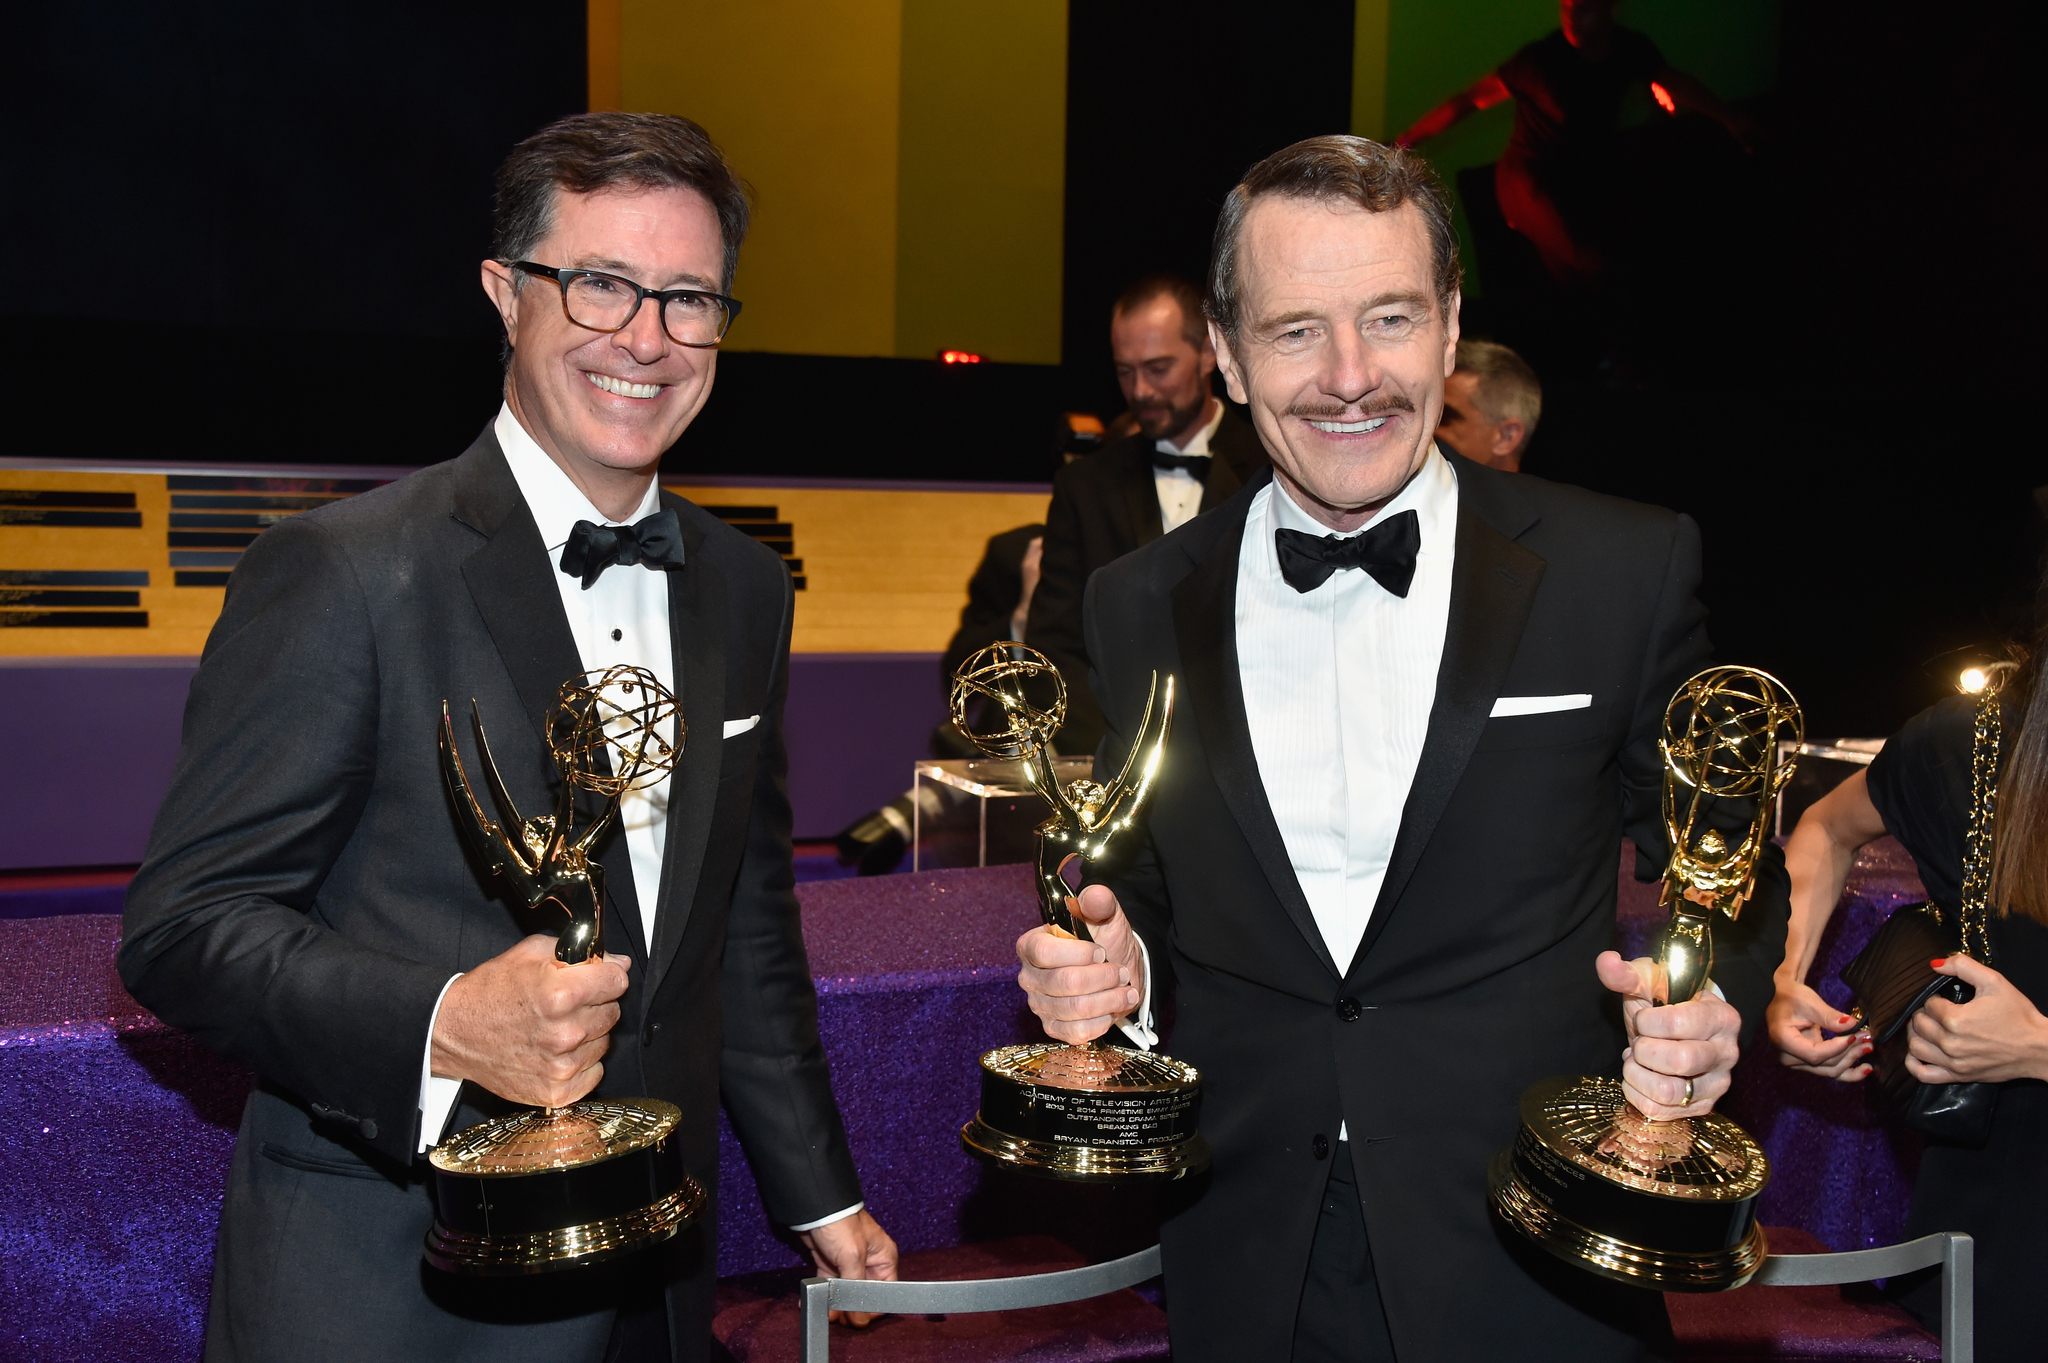 Stephen Colbert and Bryan Cranston at event of The 66th Primetime Emmy Awards (2014)